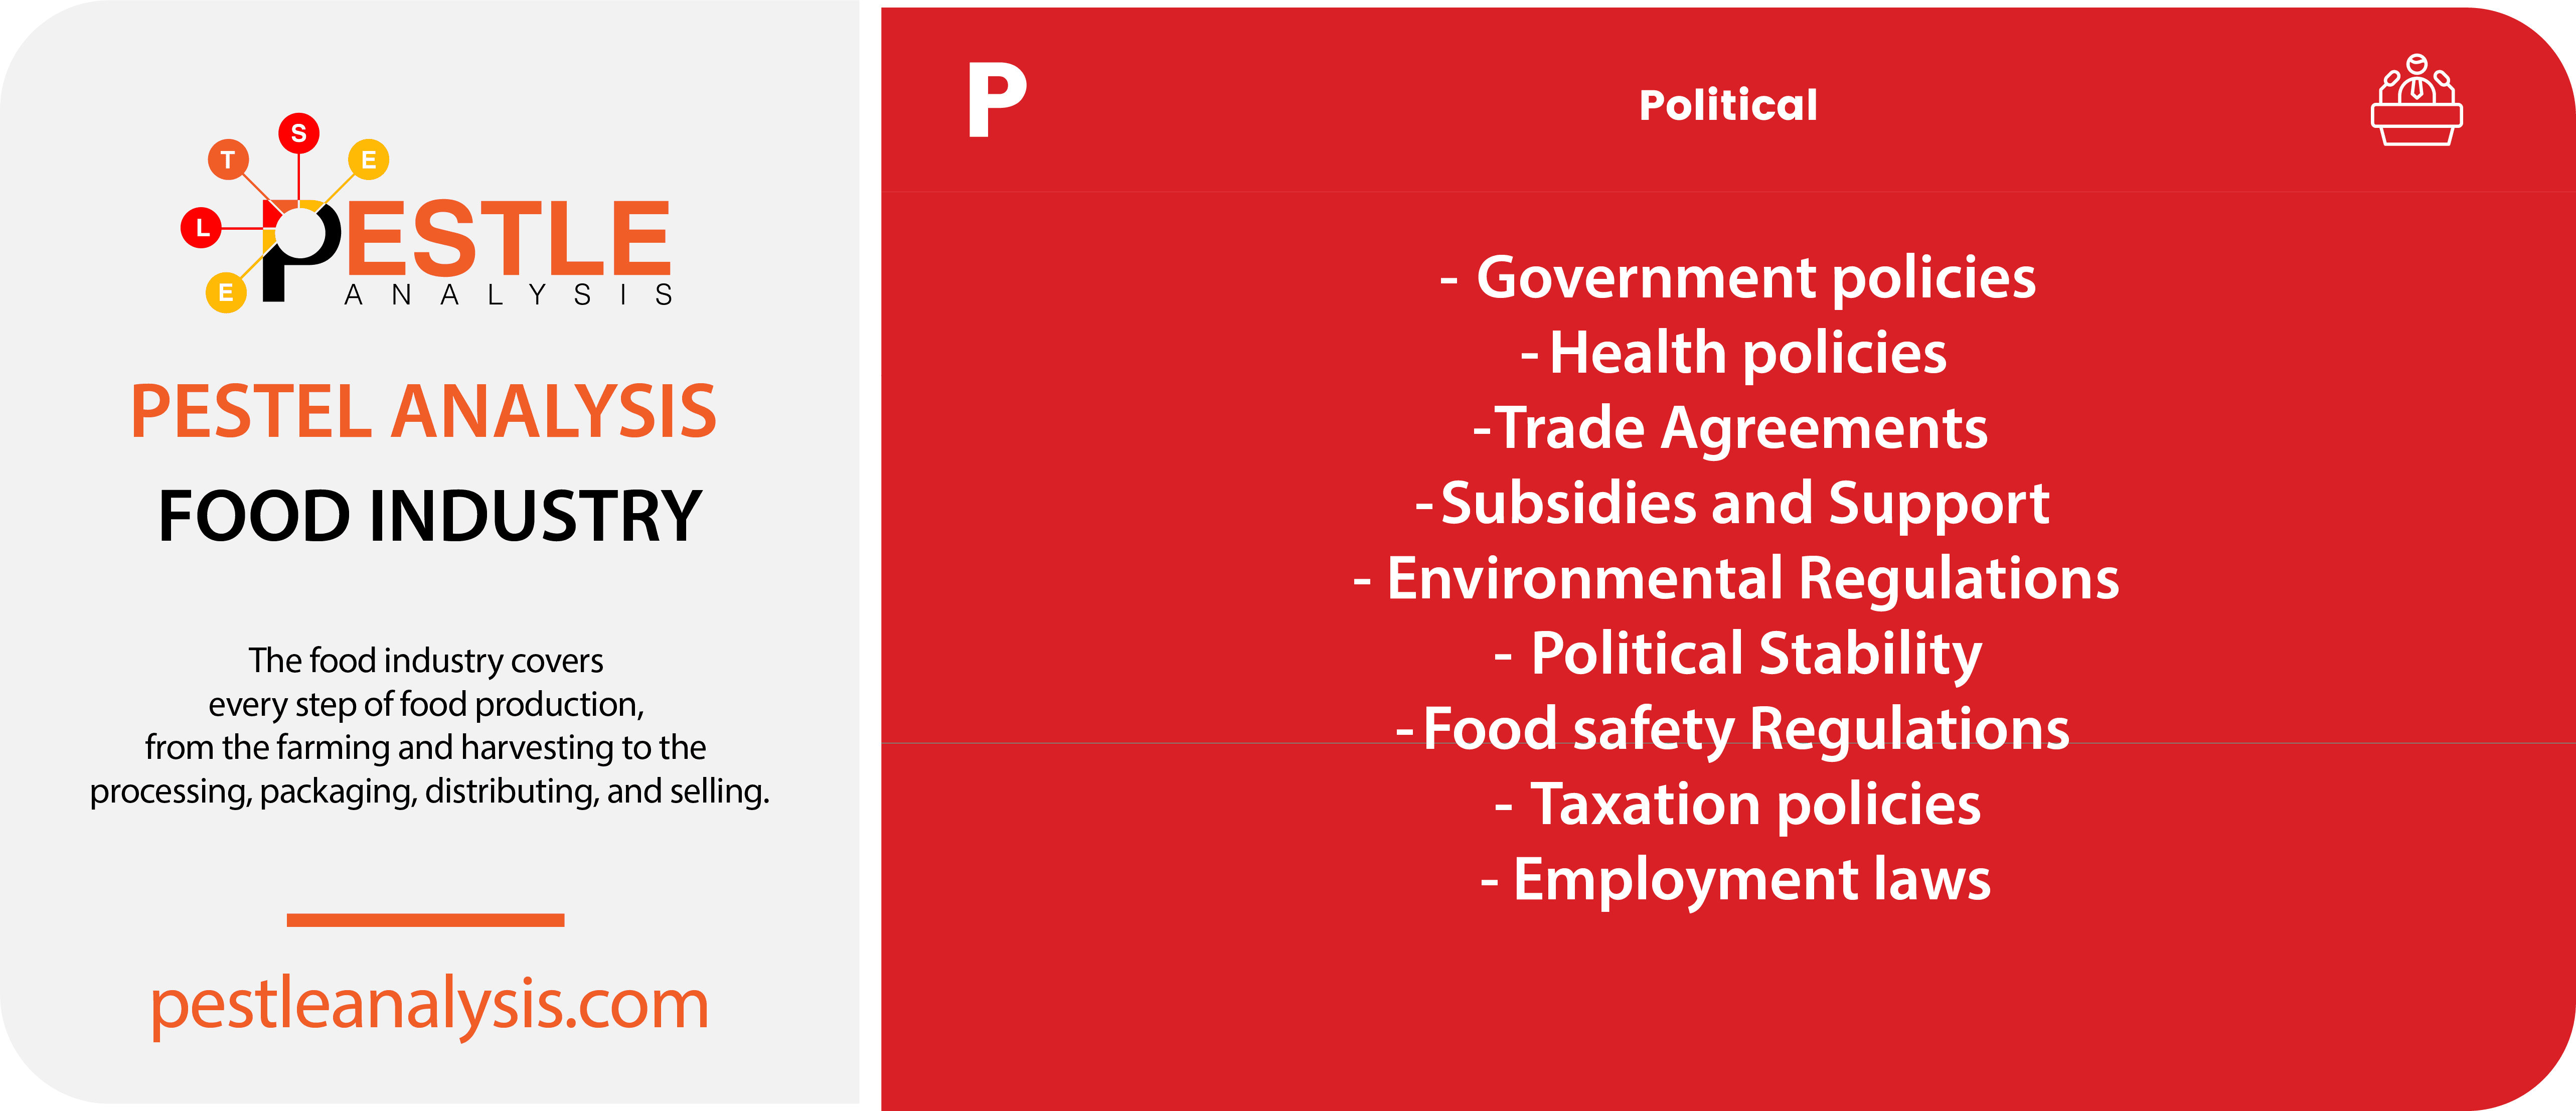 food-industry-pestle-analysis-political-factors-template